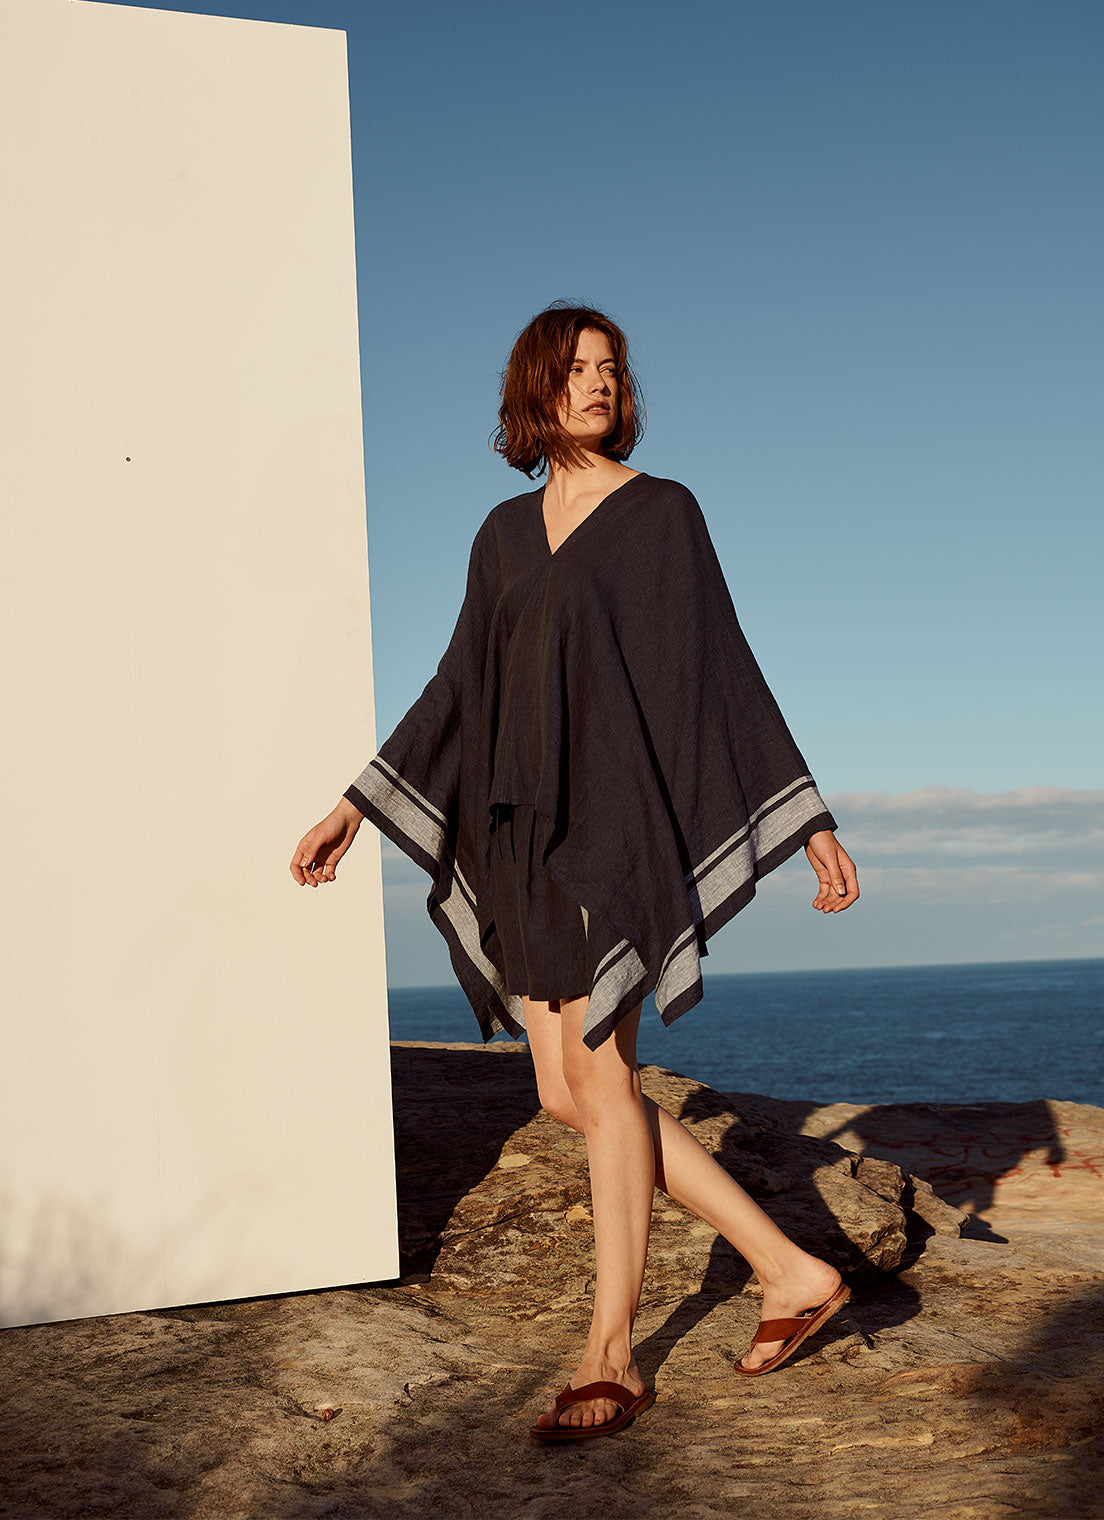 An easy fit, square cut, v-neck poncho with long sleeves made from yarn dye stripe washed linen in ink with pale blue stripe